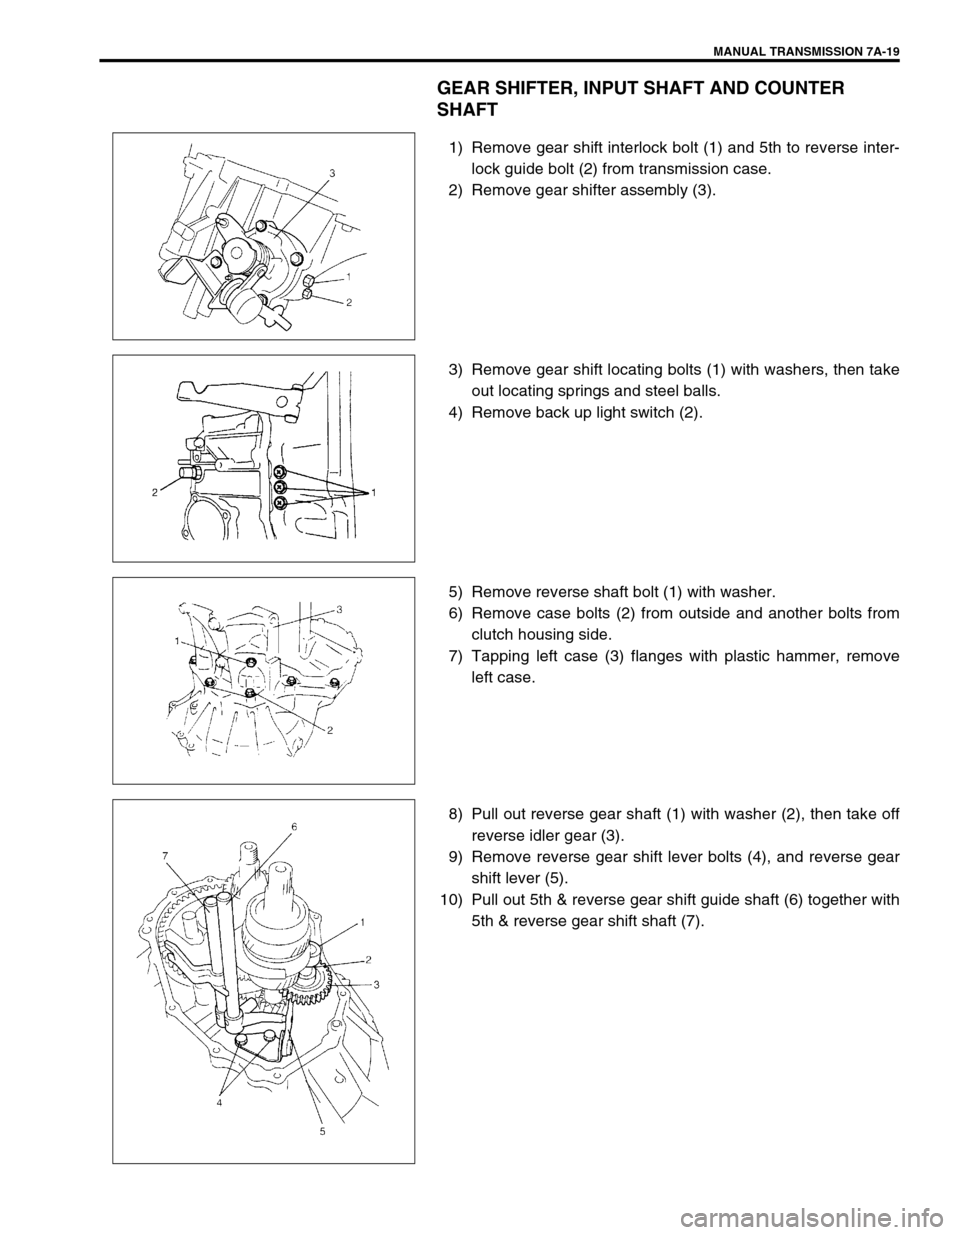 SUZUKI SWIFT 2000 1.G Transmission Service Workshop Manual MANUAL TRANSMISSION 7A-19
GEAR SHIFTER, INPUT SHAFT AND COUNTER 
SHAFT
1) Remove gear shift interlock bolt (1) and 5th to reverse inter-
lock guide bolt (2) from transmission case.
2) Remove gear shif